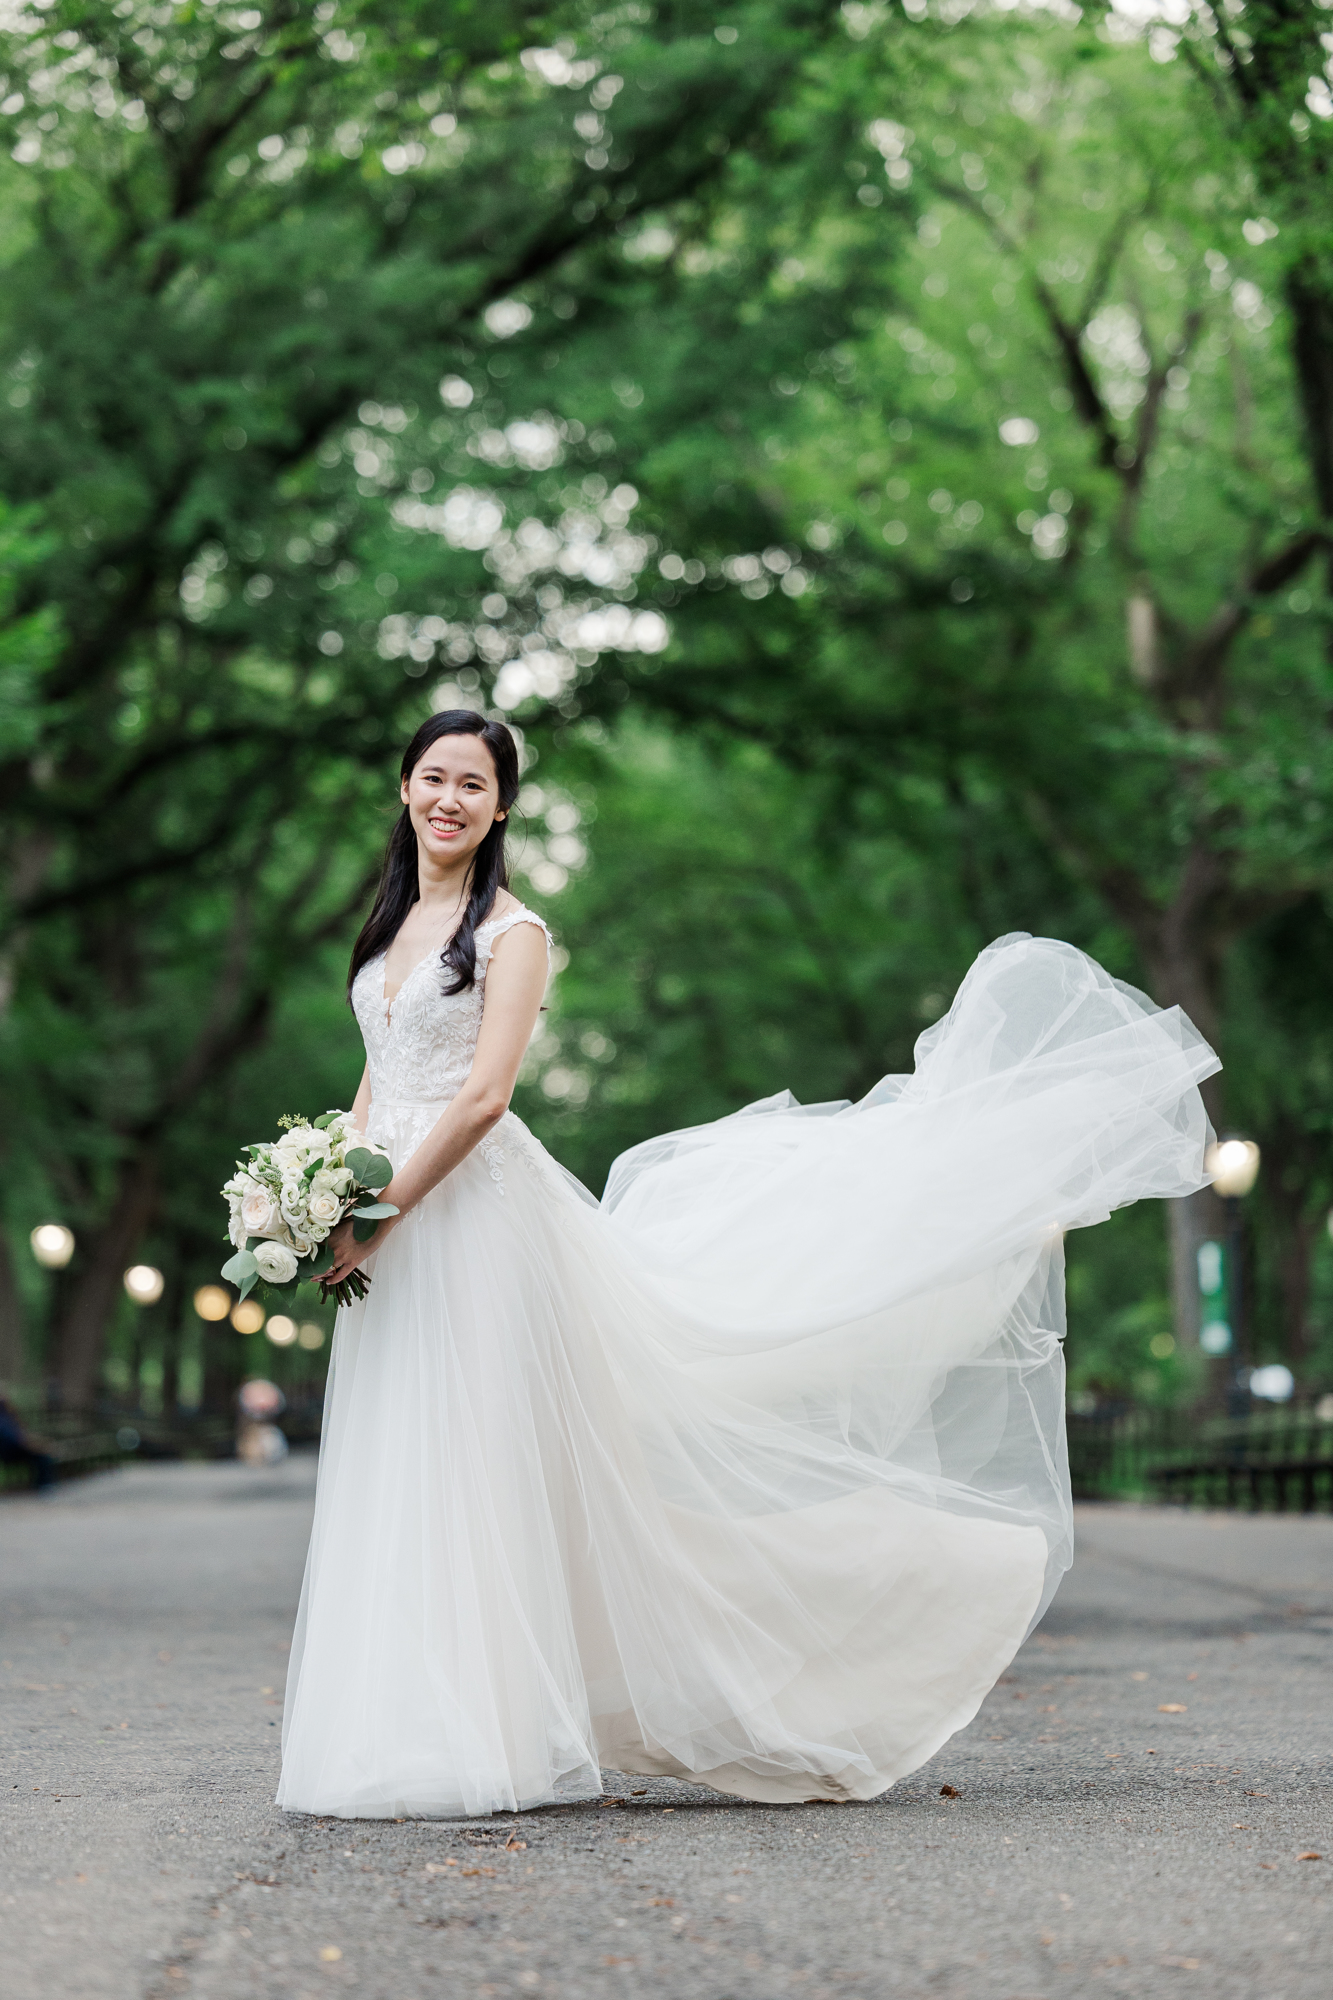 Dazzling Summer Morning Elopement Photos in Central Park New York